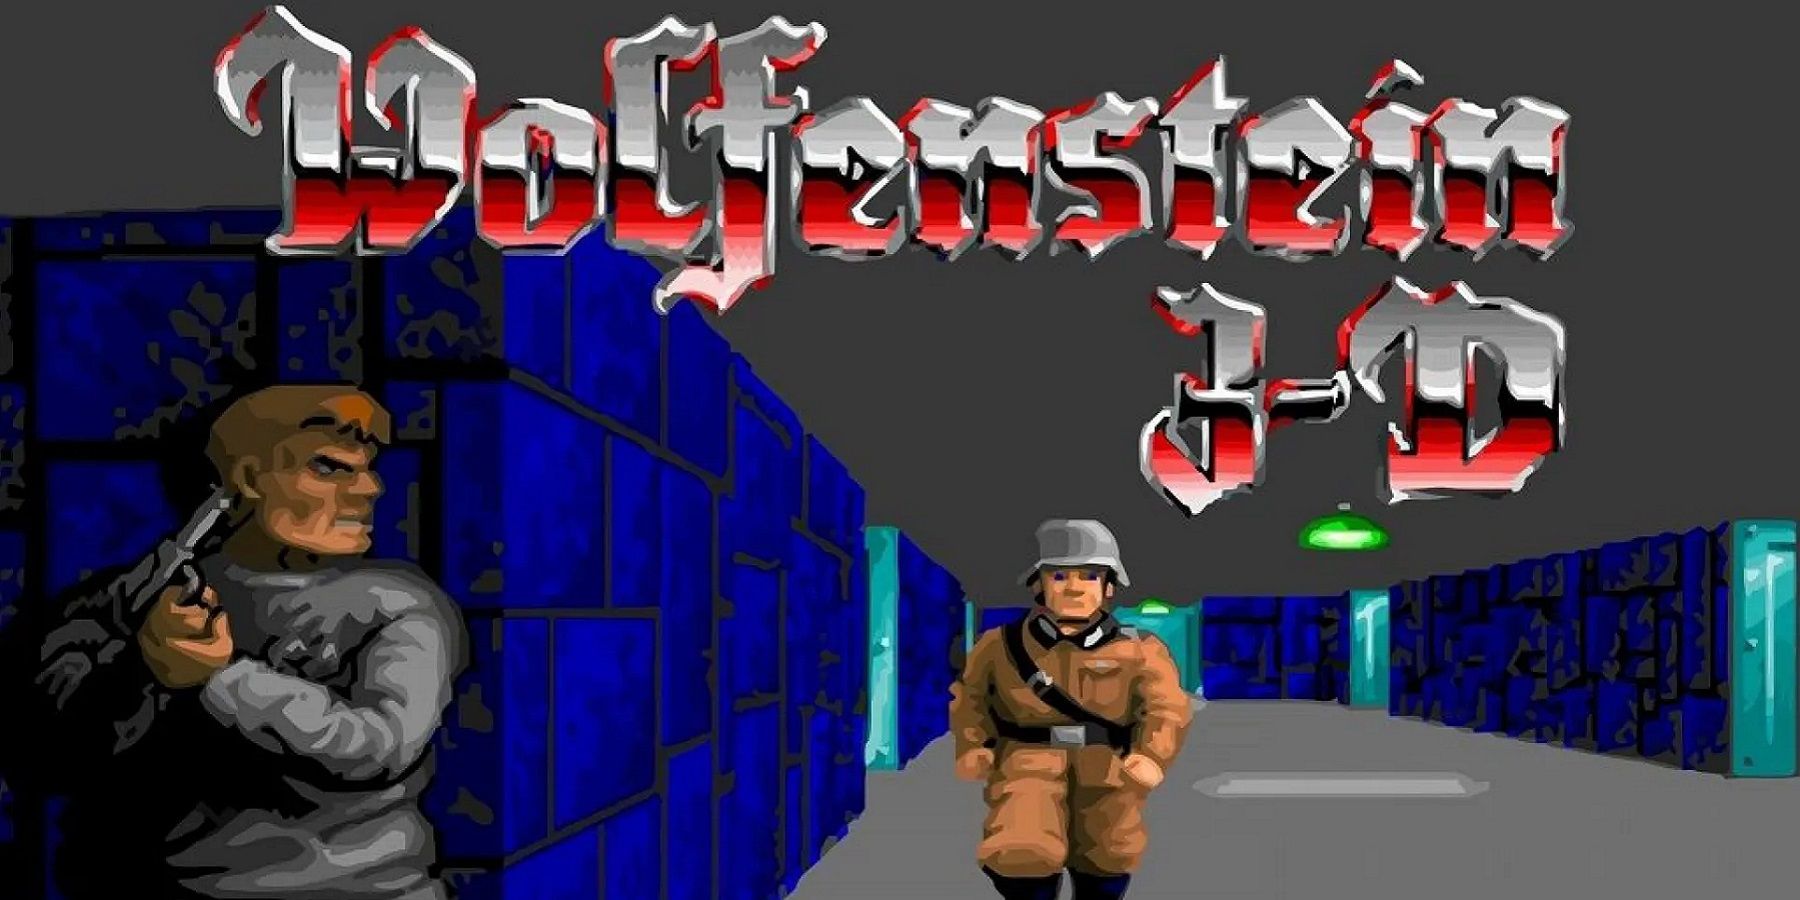 Wolfenstein 3D Will get Demade, Runs on a Very Early Intel Processor